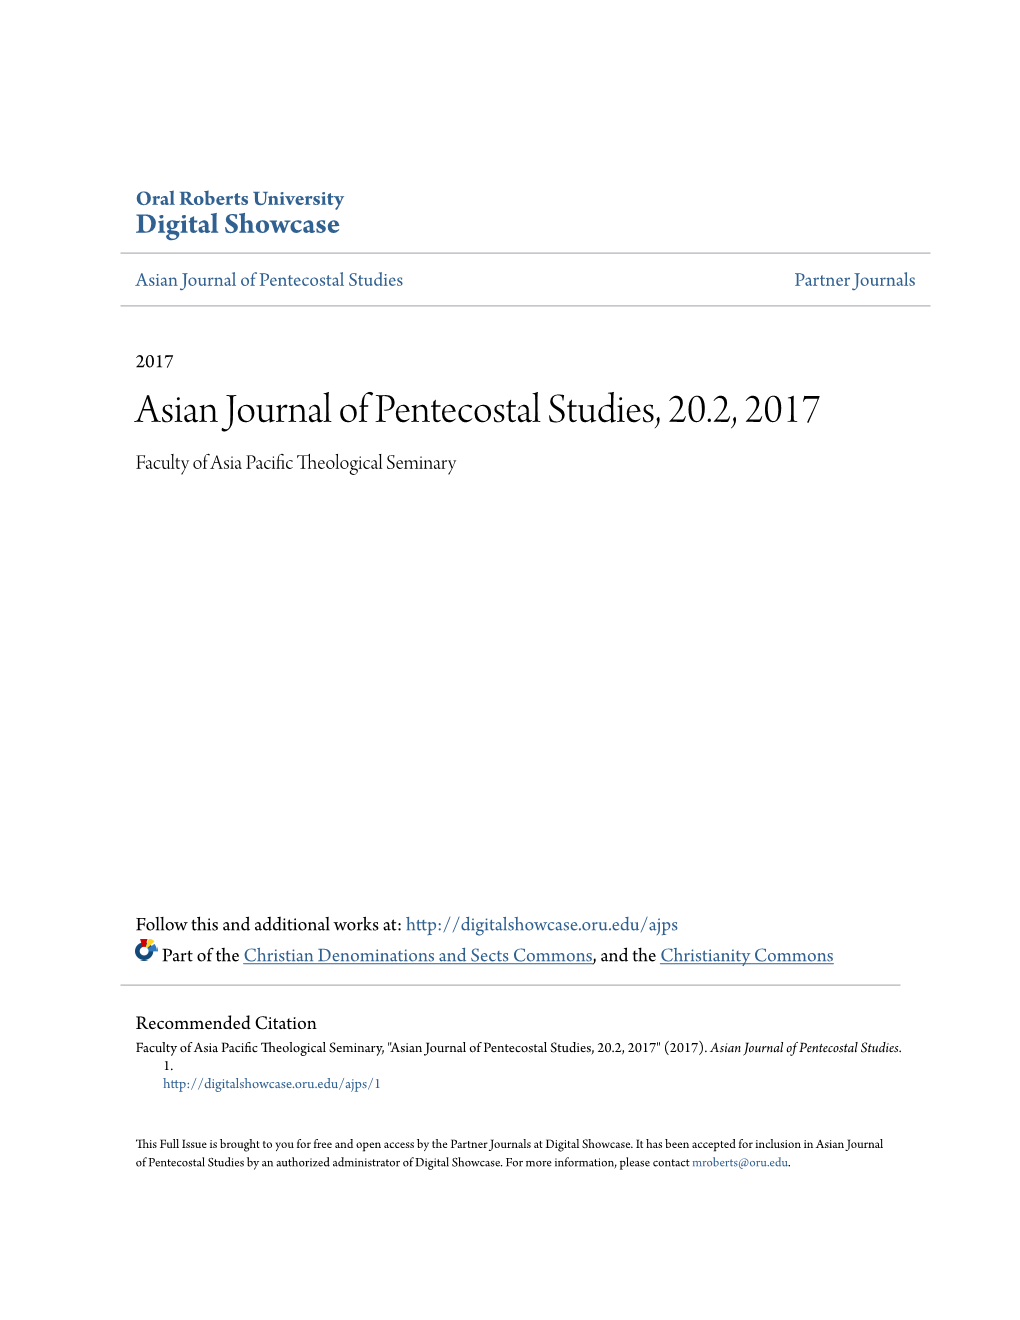 Asian Journal of Pentecostal Studies, 20.2, 2017 Faculty of Asia Pacific Theological Seminary